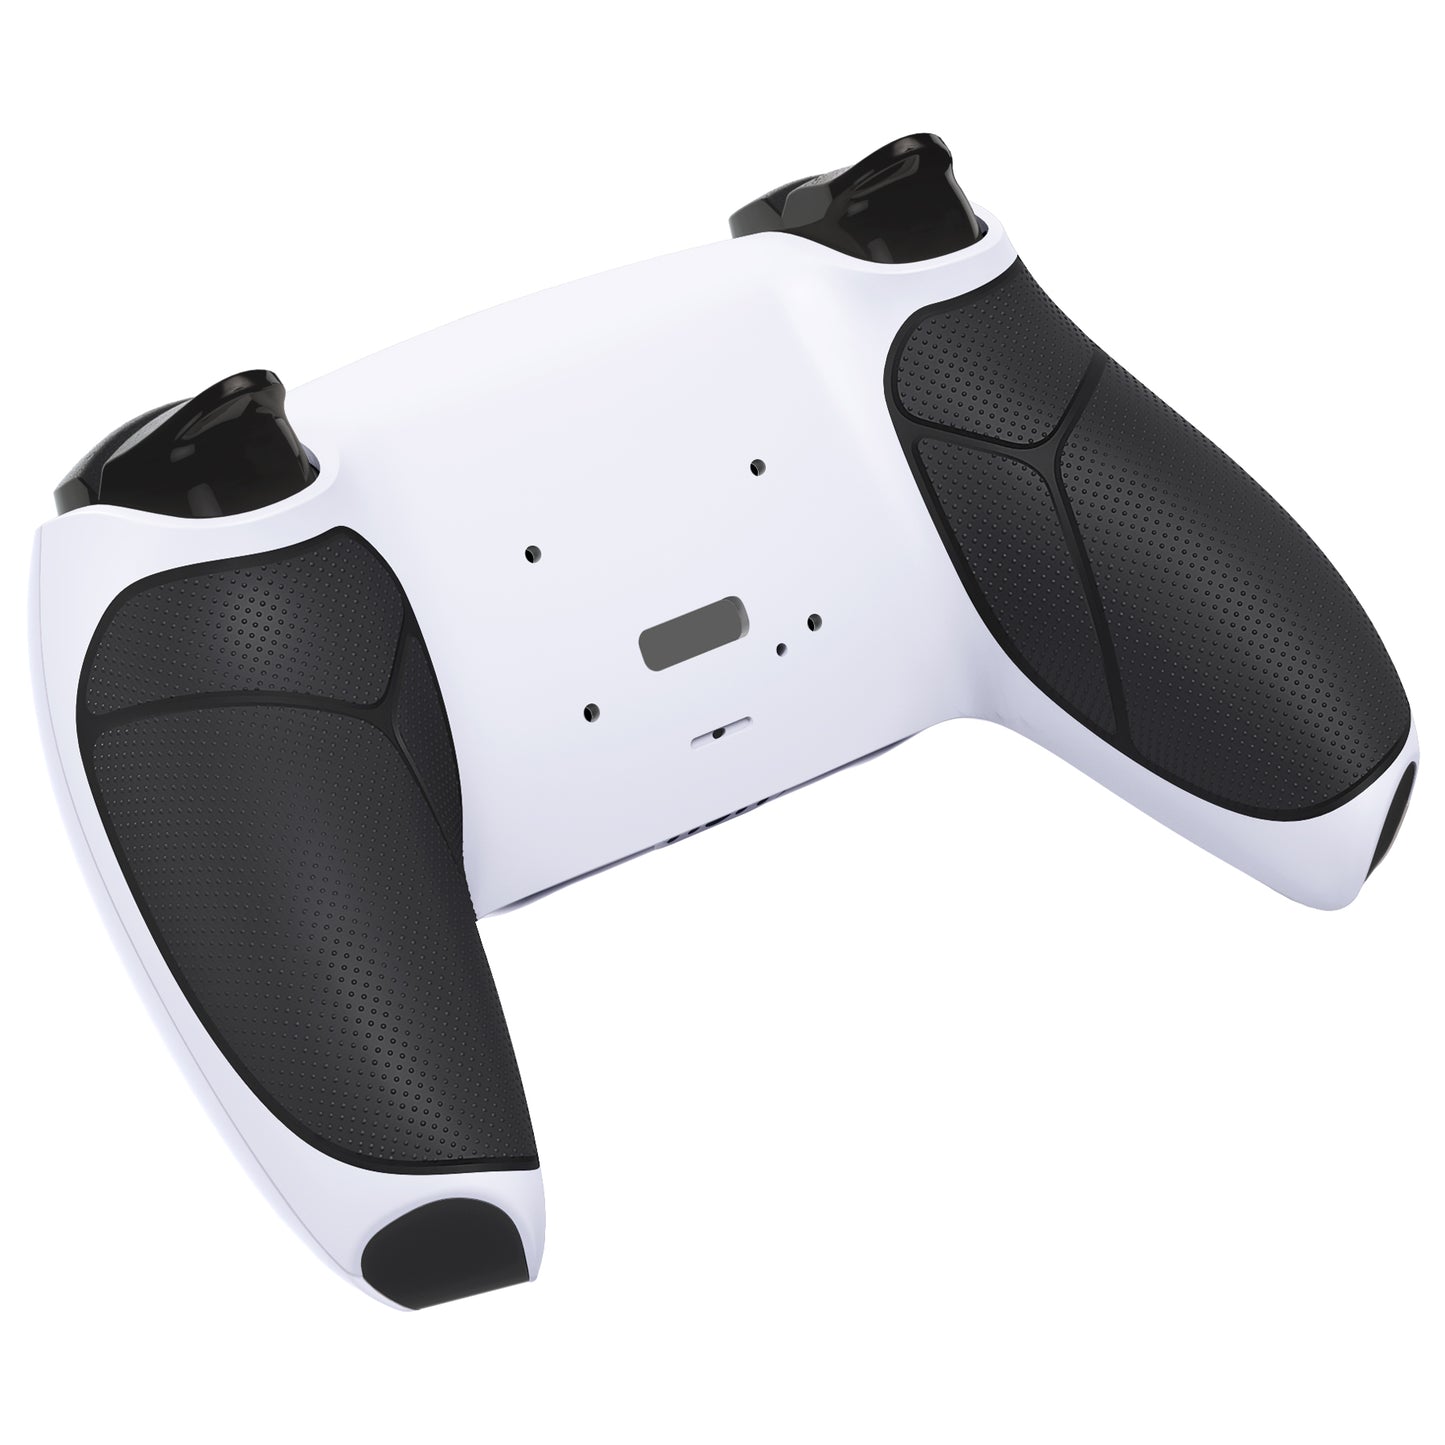 eXtremeRate Retail Black White Performance Rubberized Grip Redesigned Back Shell for PS5 Controller eXtremerate RISE Remap Kit - Controller & RISE Remap Board NOT Included - UPFU6010